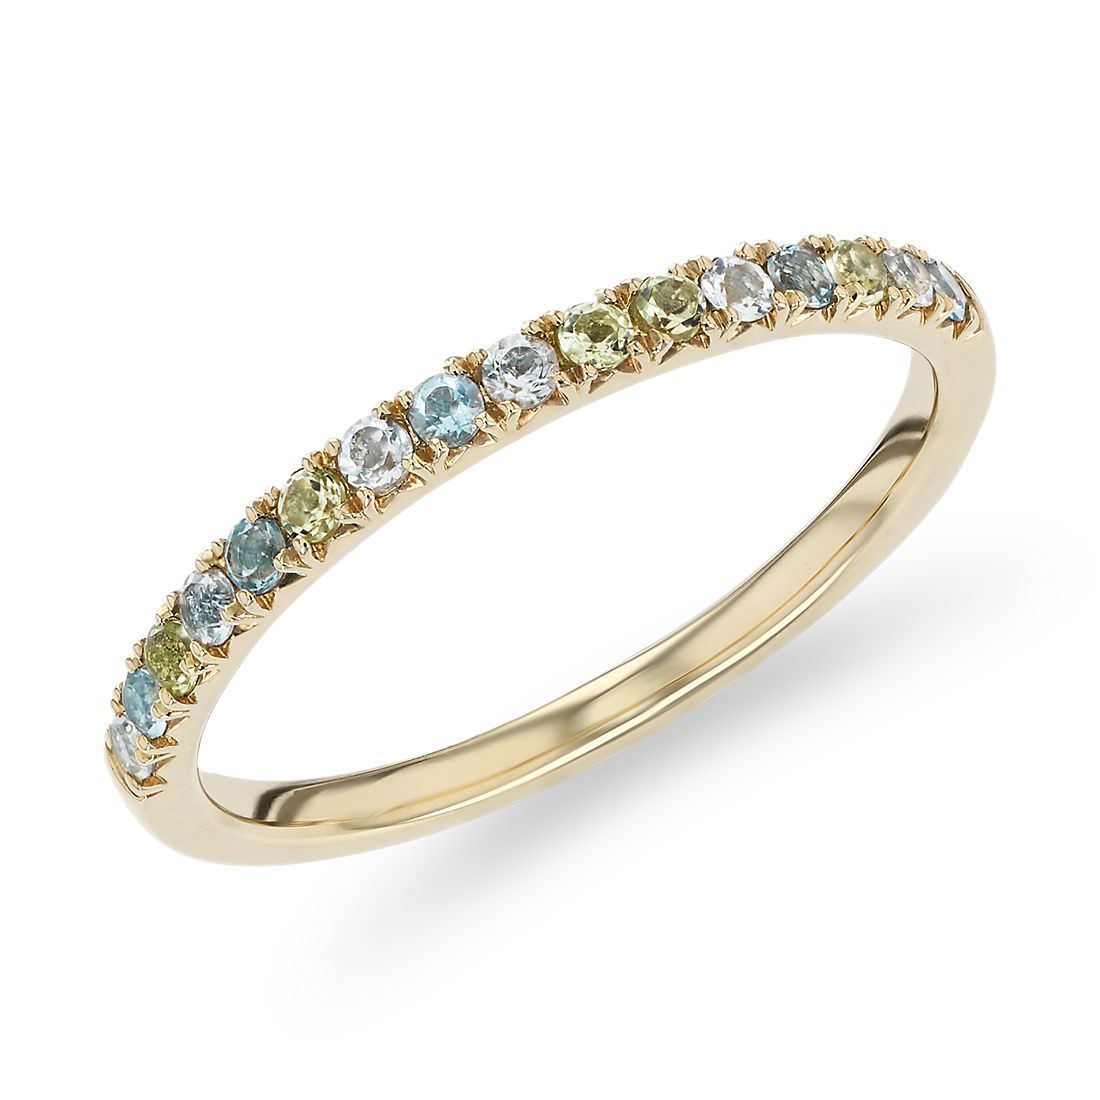 Petite Blue Topaz, White Topaz and Peridot Ring in 14k Yellow Gold (1.5mm)